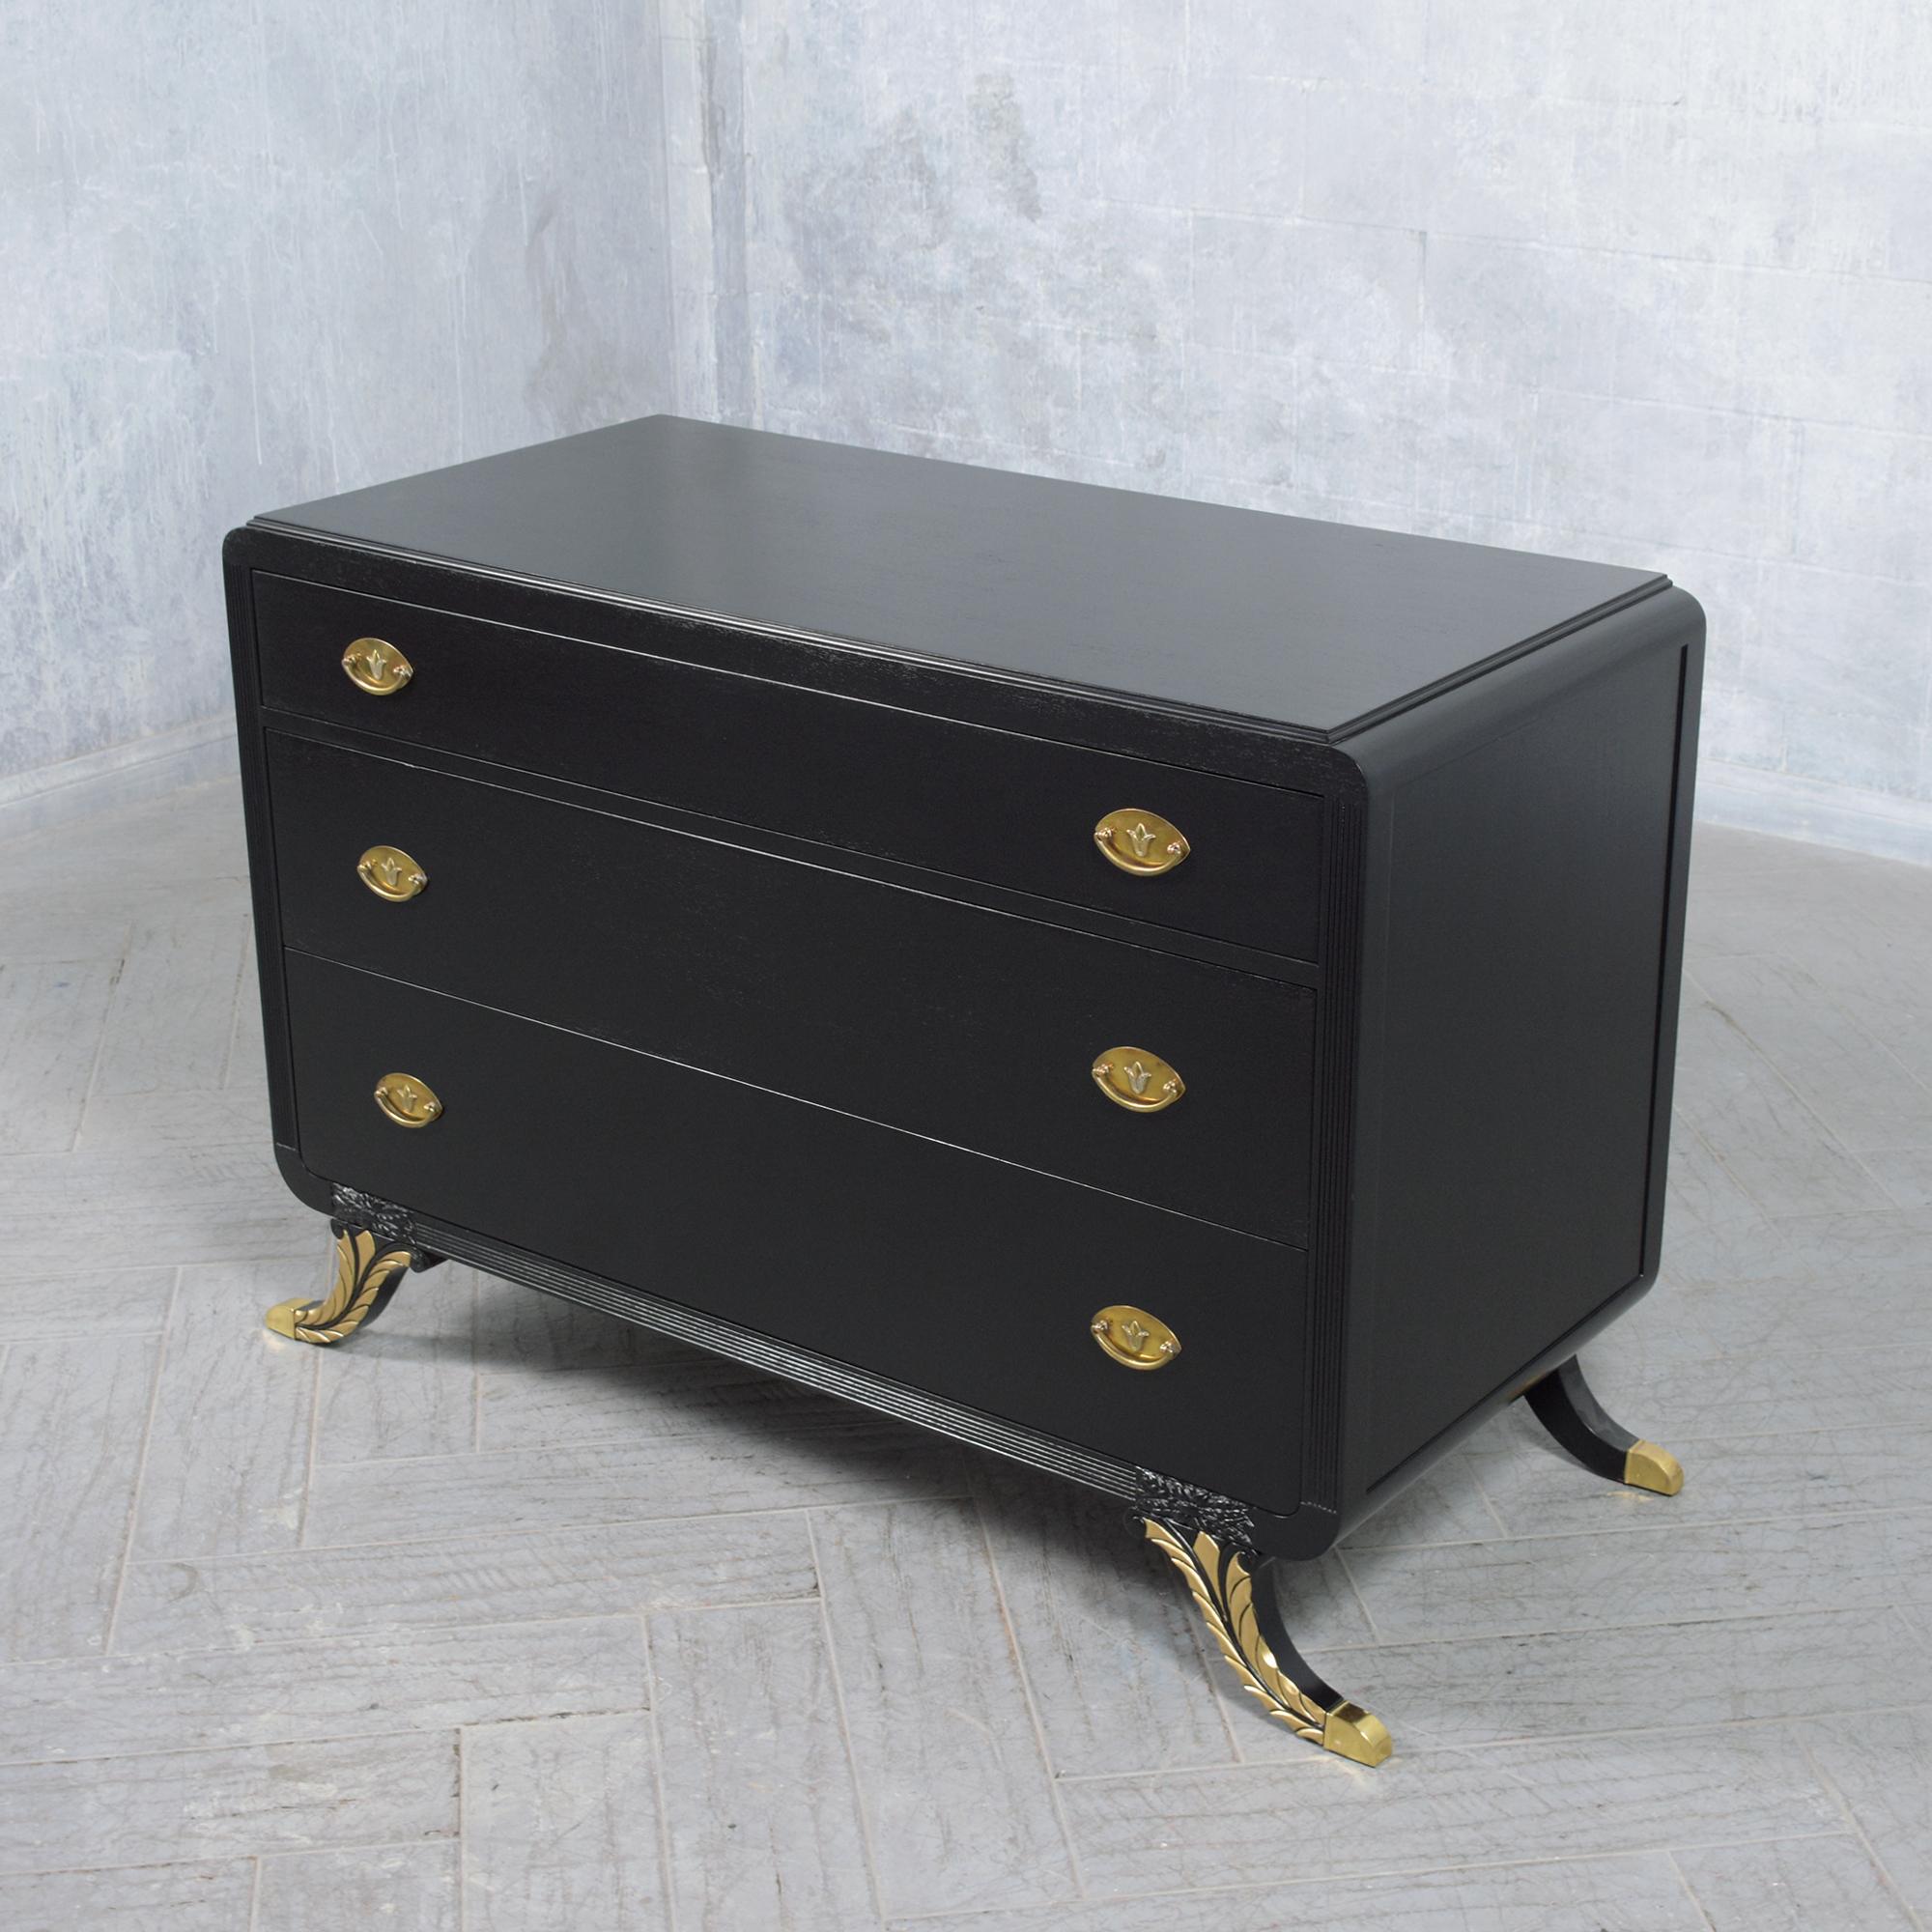 Antique Empire Ebonized Dresser: Timeless Craftsmanship Restored In Good Condition For Sale In Los Angeles, CA